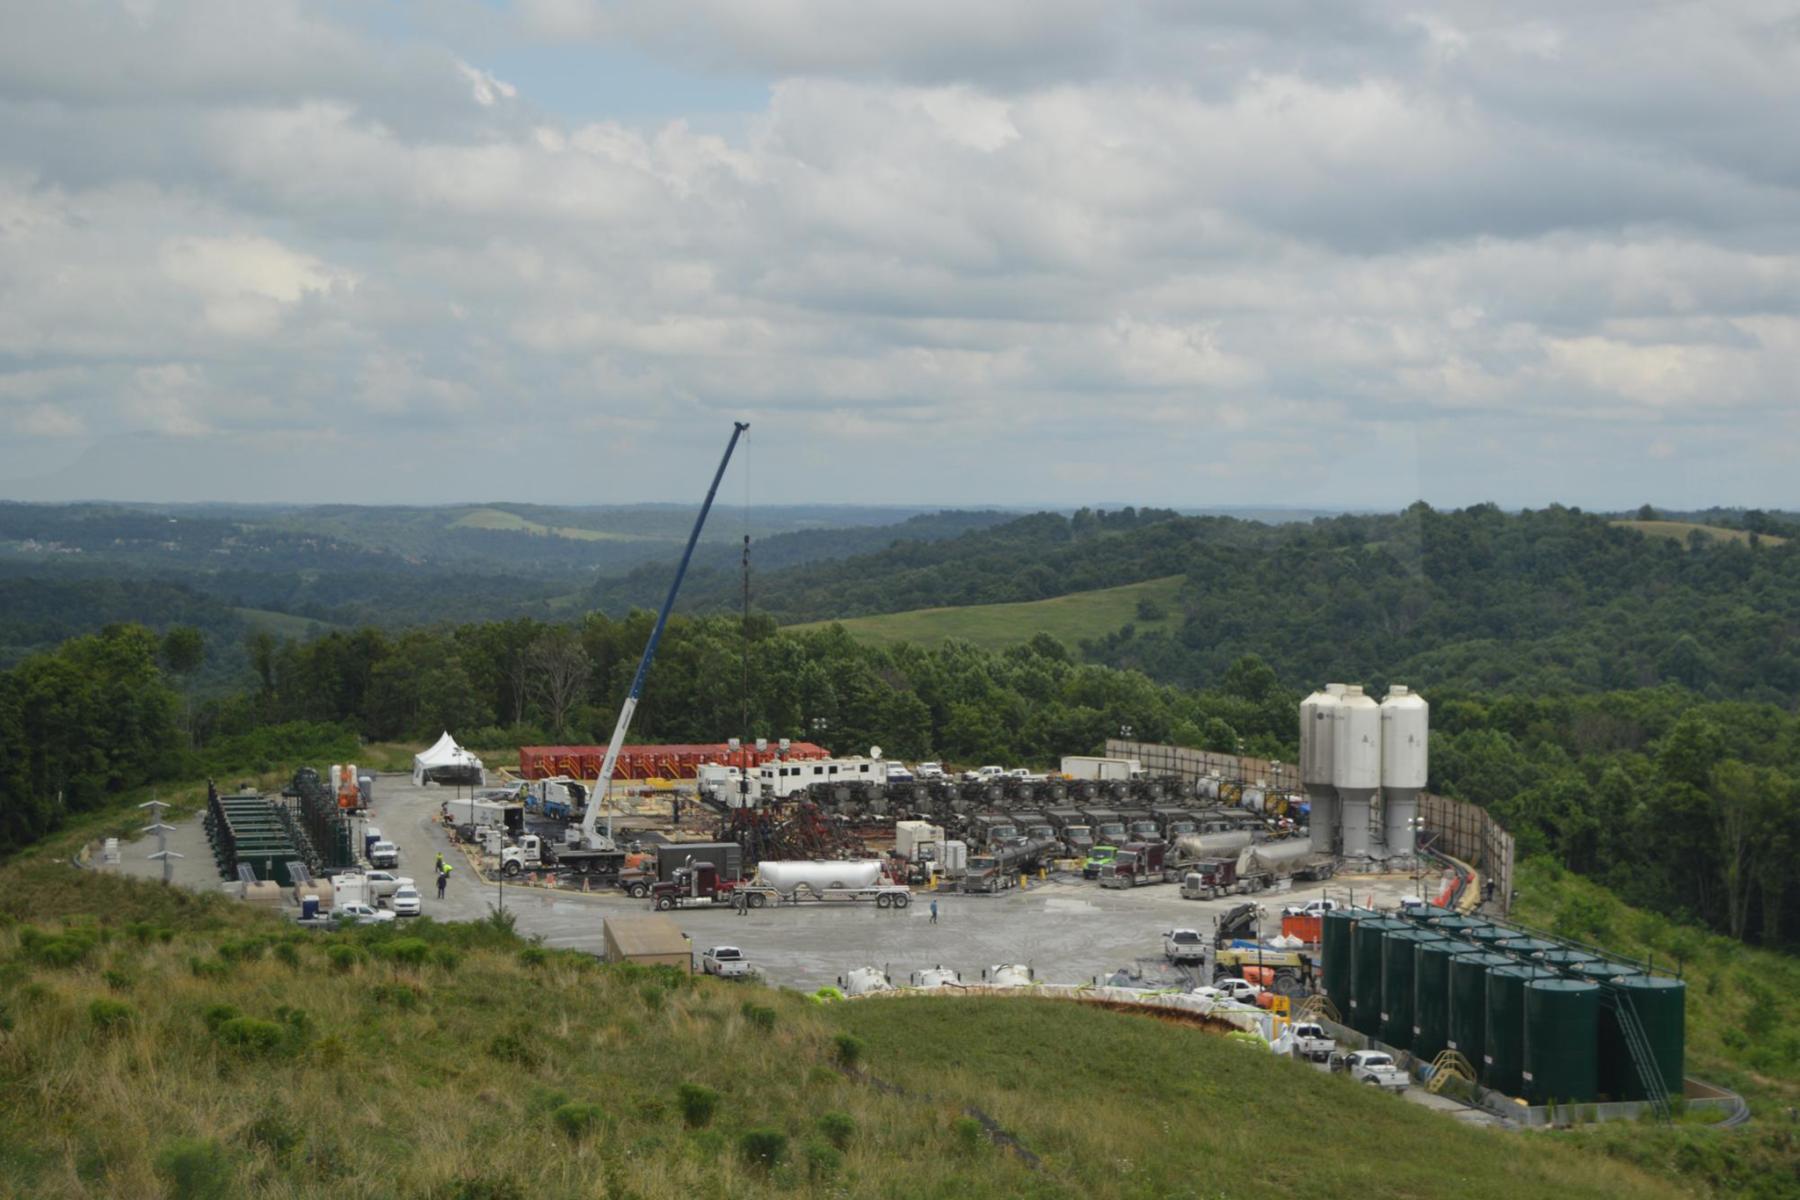 A Marcellus Shale well site in Pennsylvania. Credit: Penn State